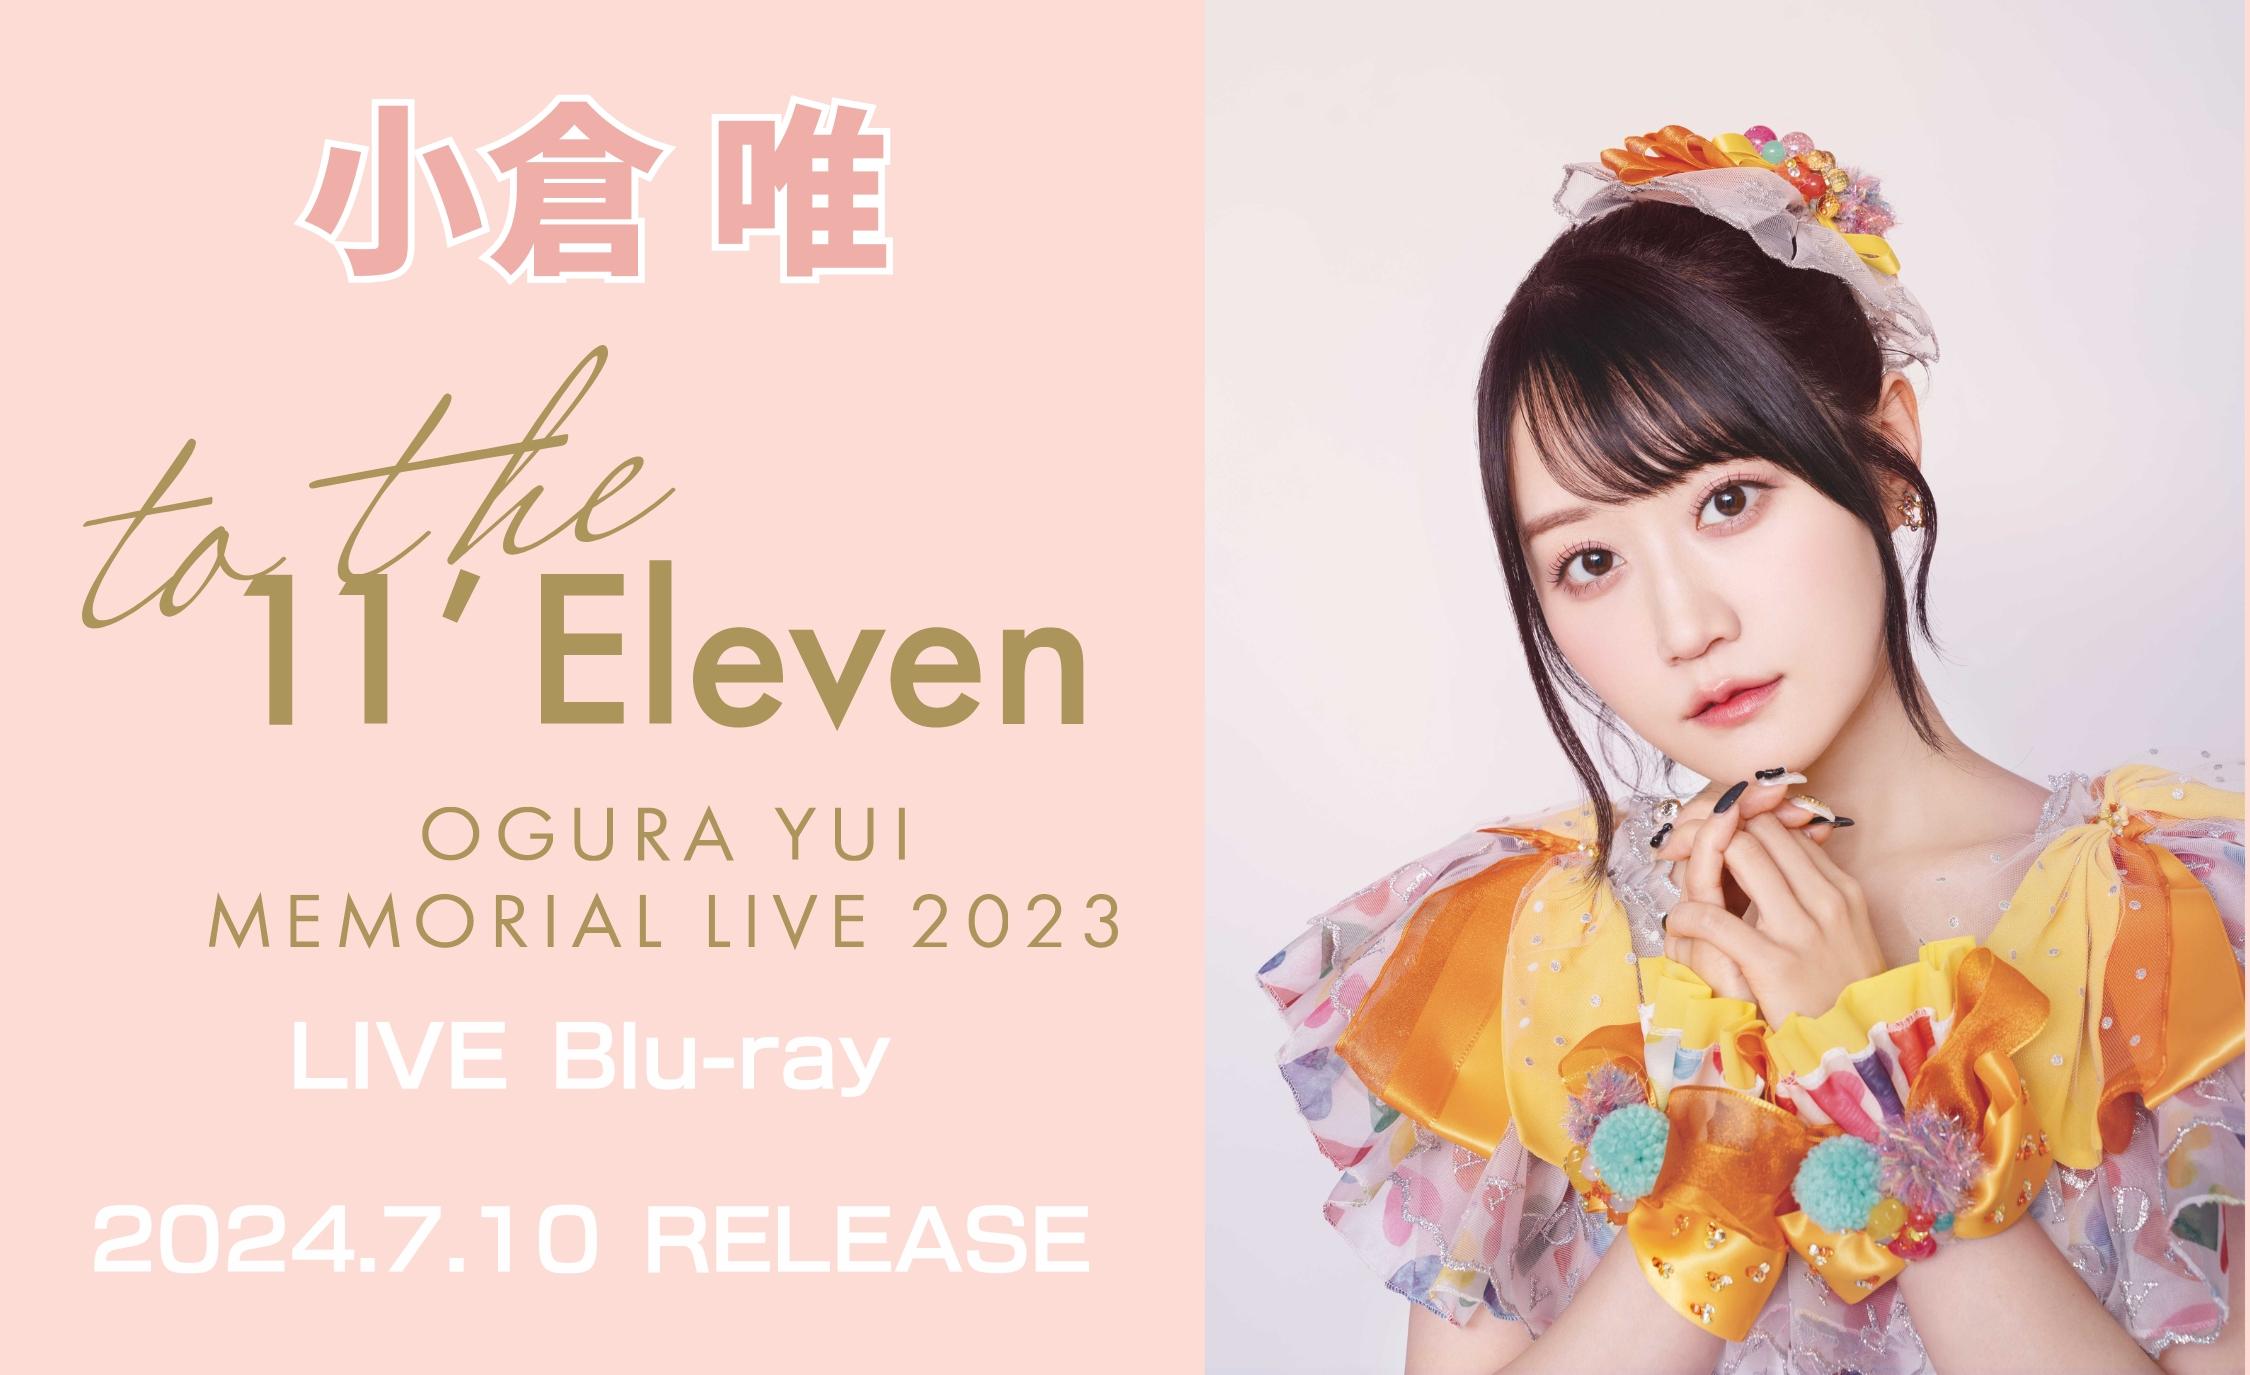 LIVE Blu-ray「小倉 唯 Memorial LIVE 2023 ～ To the 11'Eleven ～」